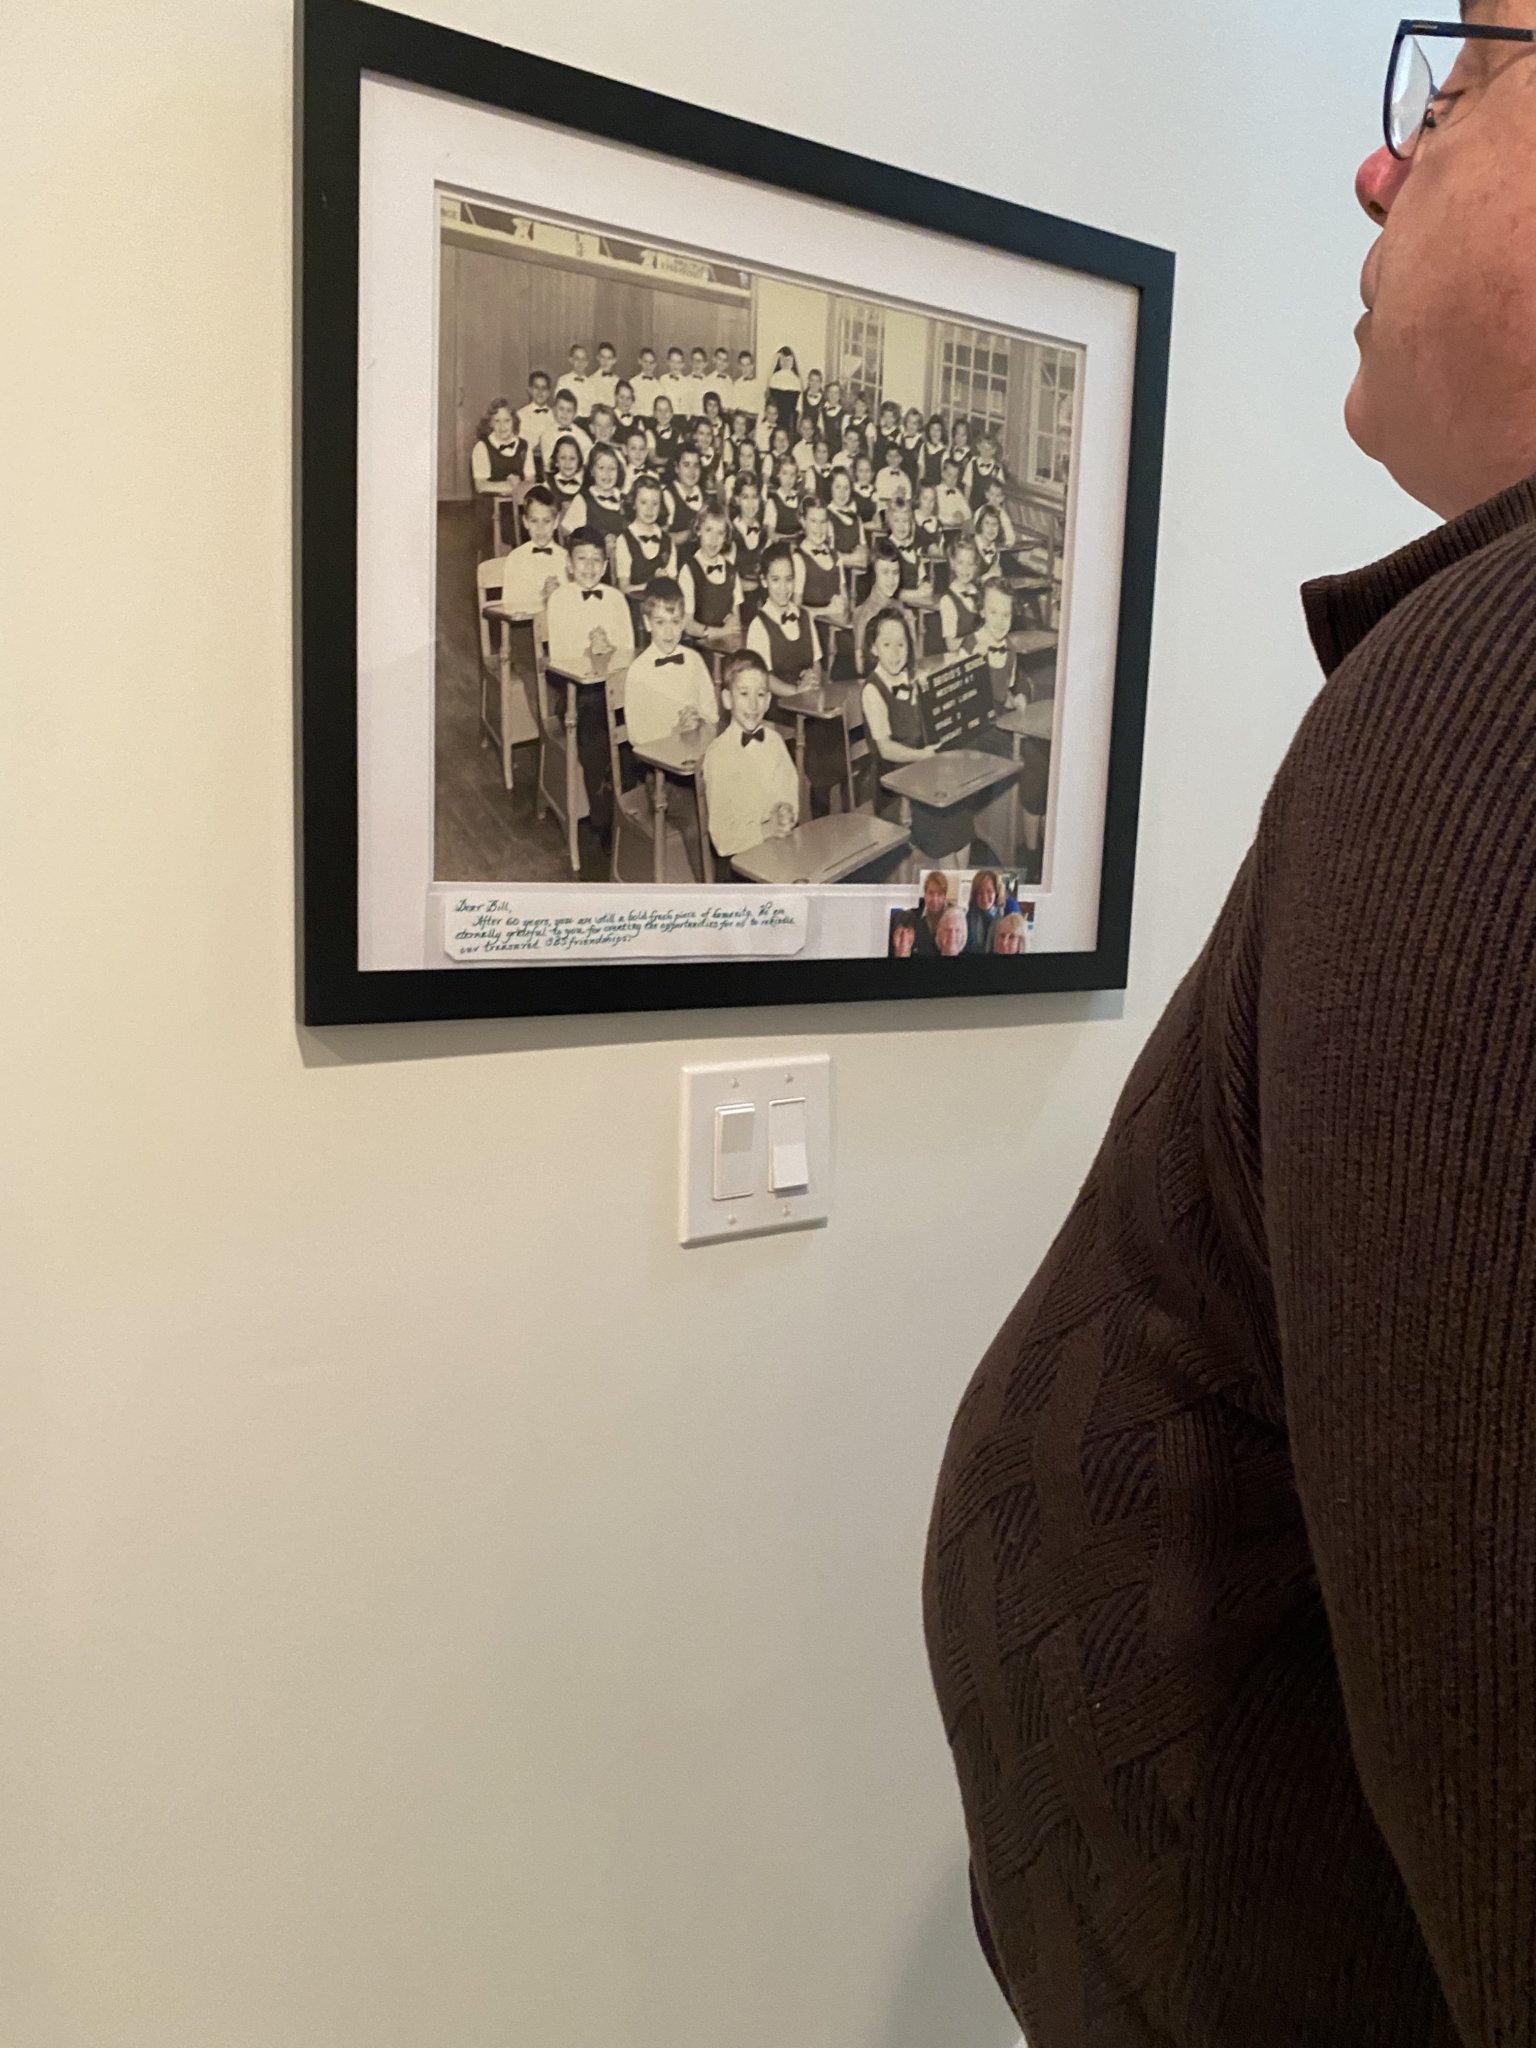 Bill O'Reilly (standing to the left of the nun in the photograph) showed us an old school photo taken during his time as student at St. Brigid’s School in Westbury.